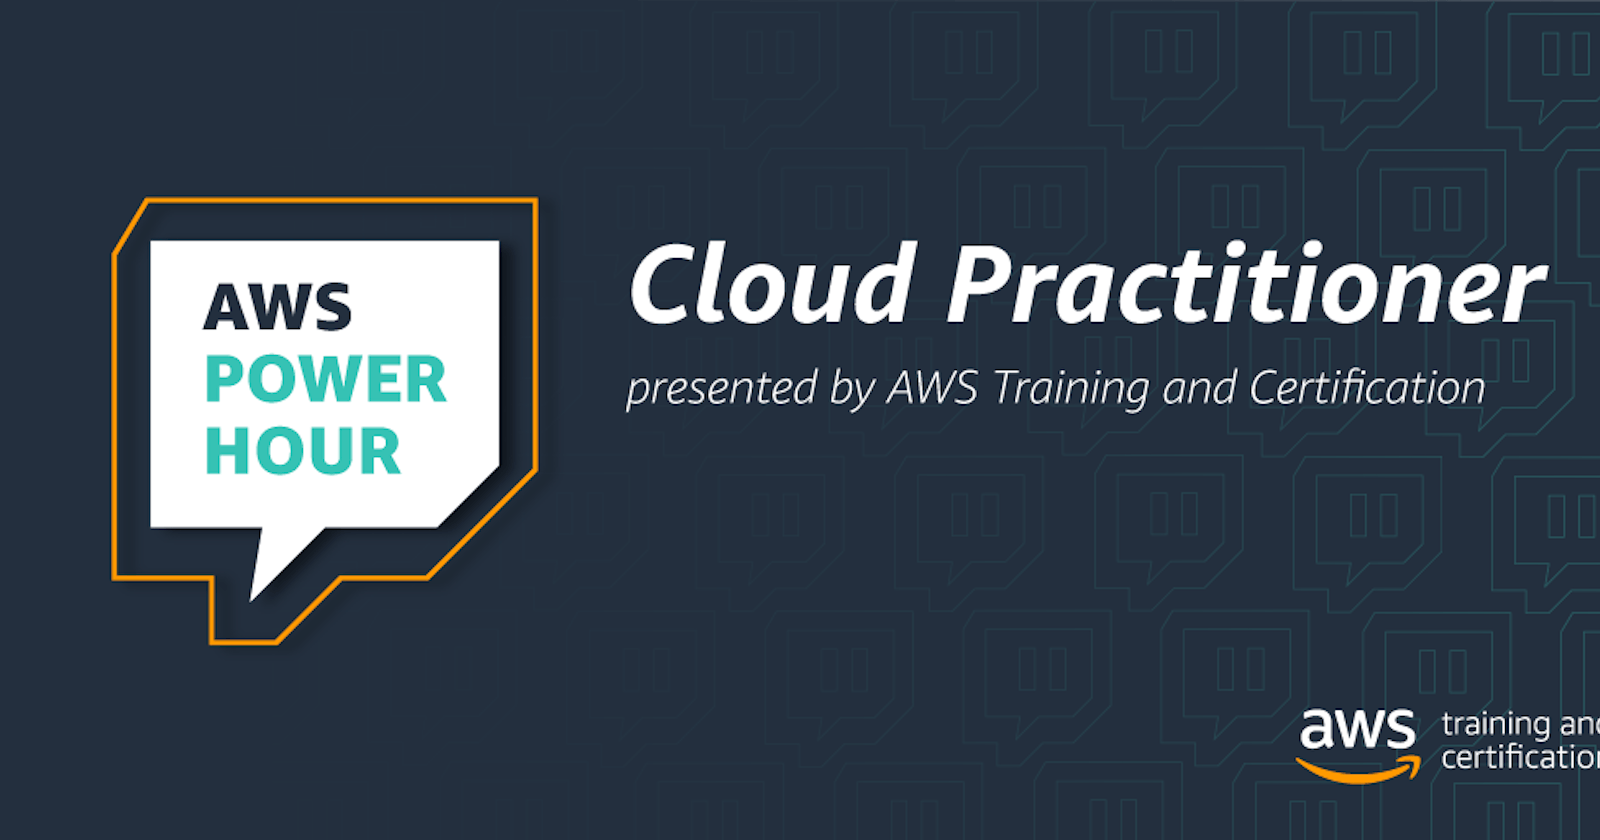 Join us live on Twitch
Get trained on AWS Cloud essentials—free on Twitch